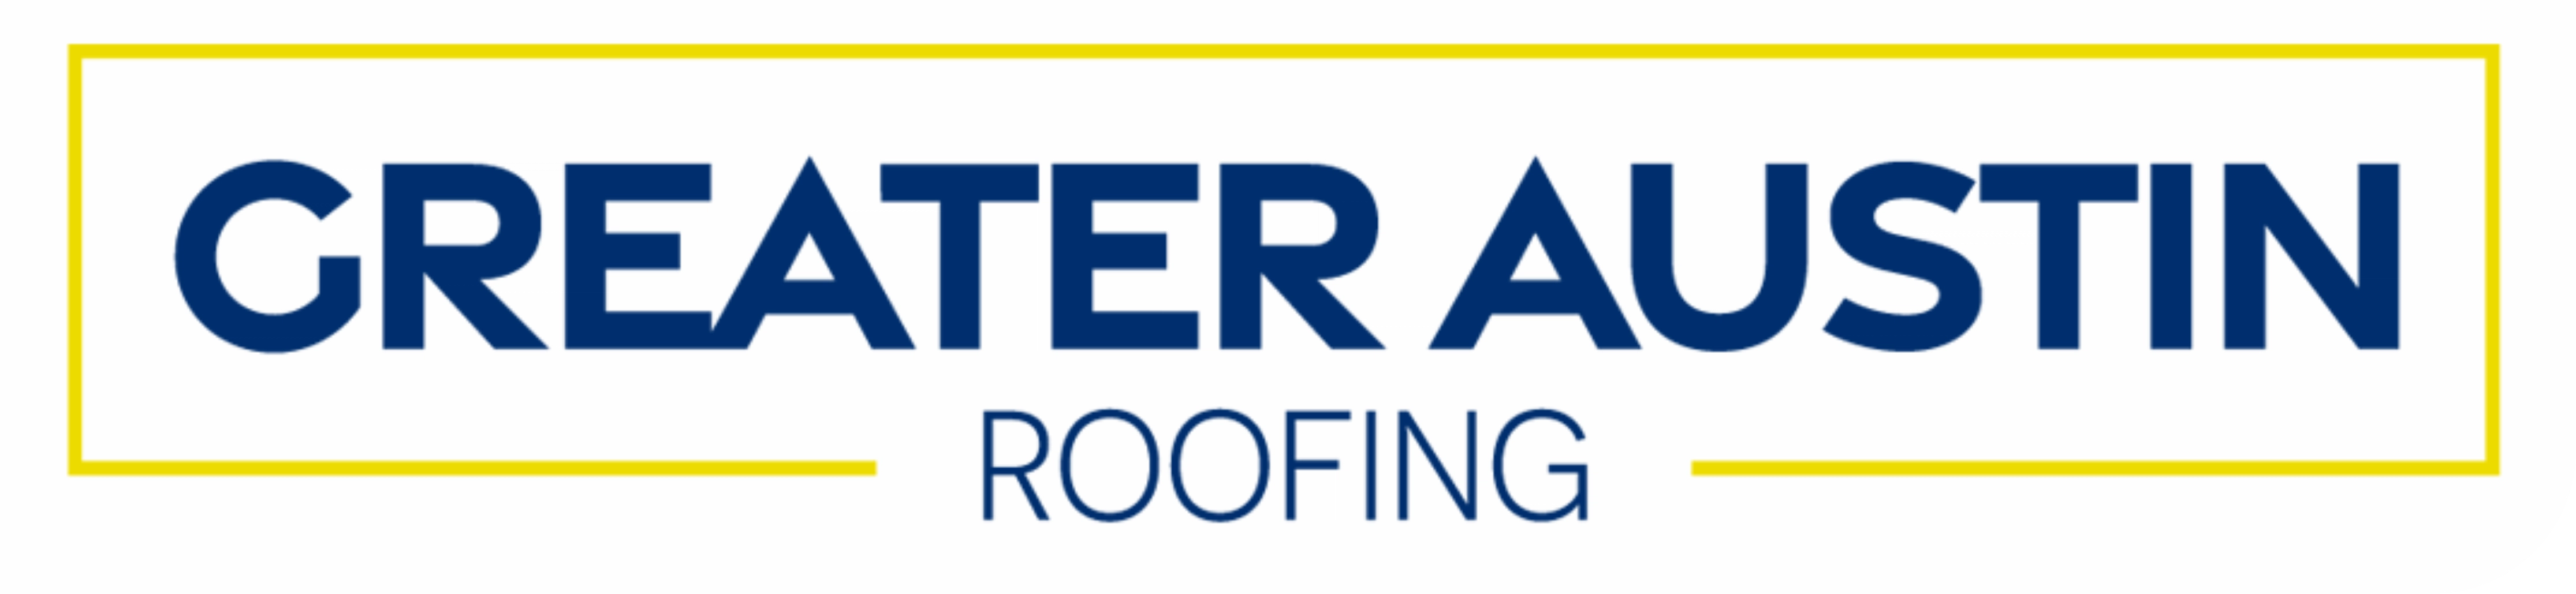 Greater Austin Roofing Logo